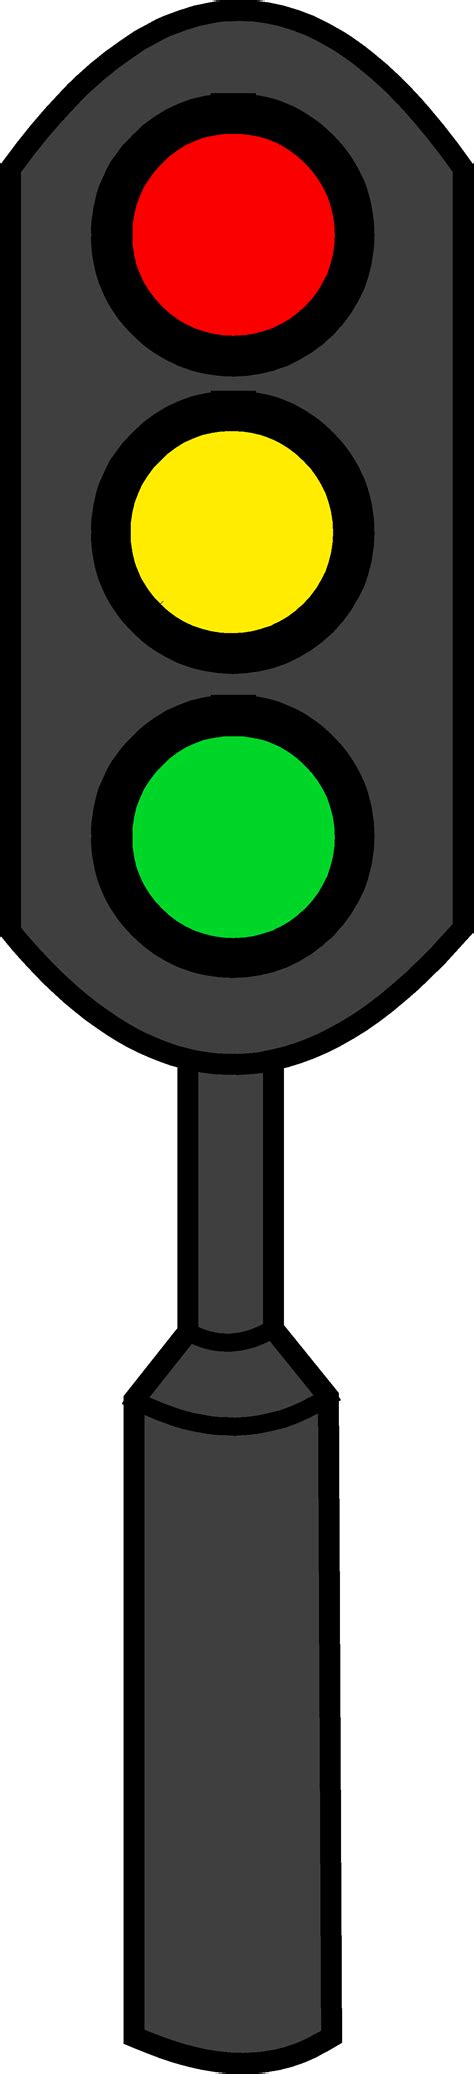 Free Traffic Light Clipart Download Free Traffic Light Clipart Png